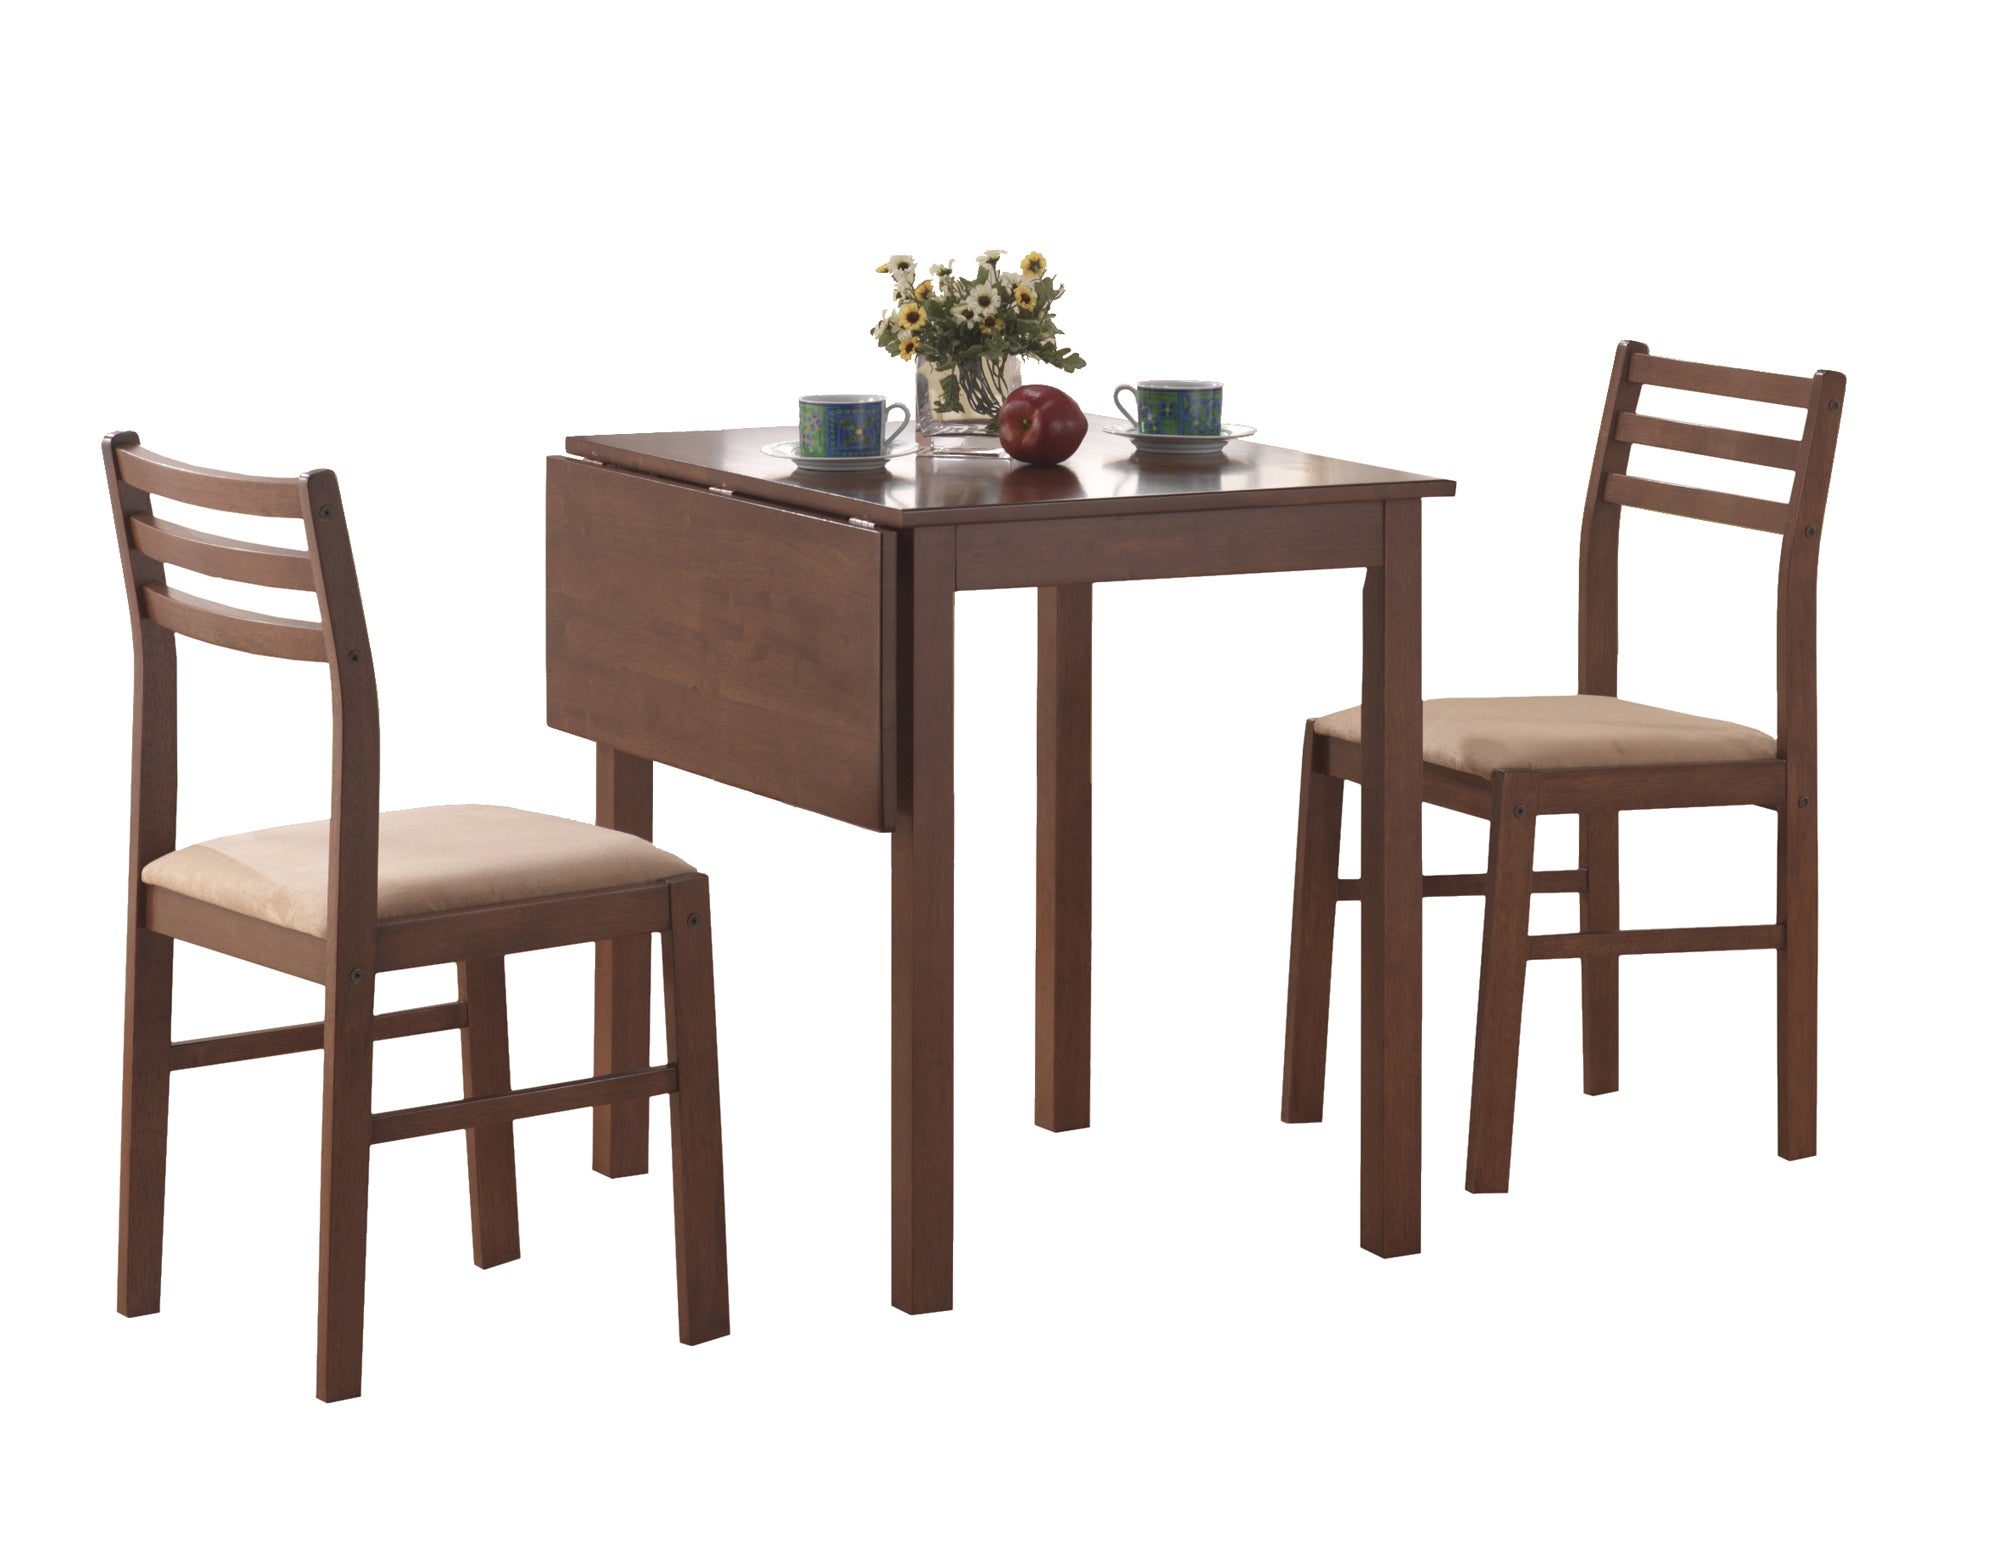 Valner Wooden Drop Leaf Dining Table With 2 Chairs (Walnut - 3 Pcs Set)